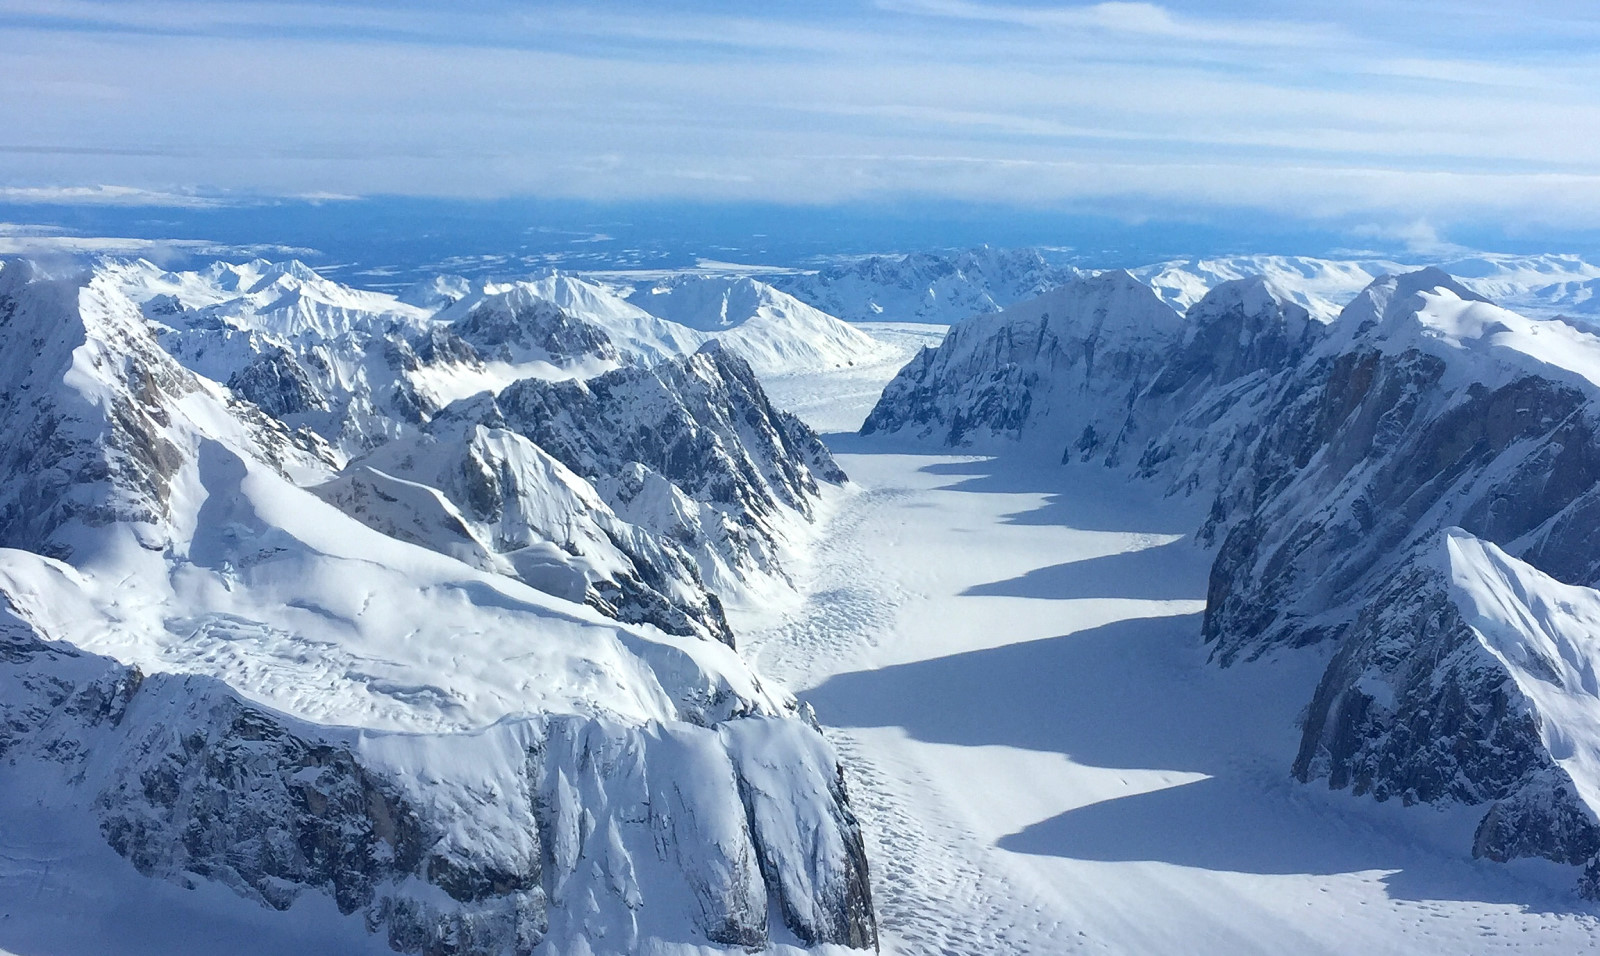 Charter an Alaska back country skiing trip with Trygg Air